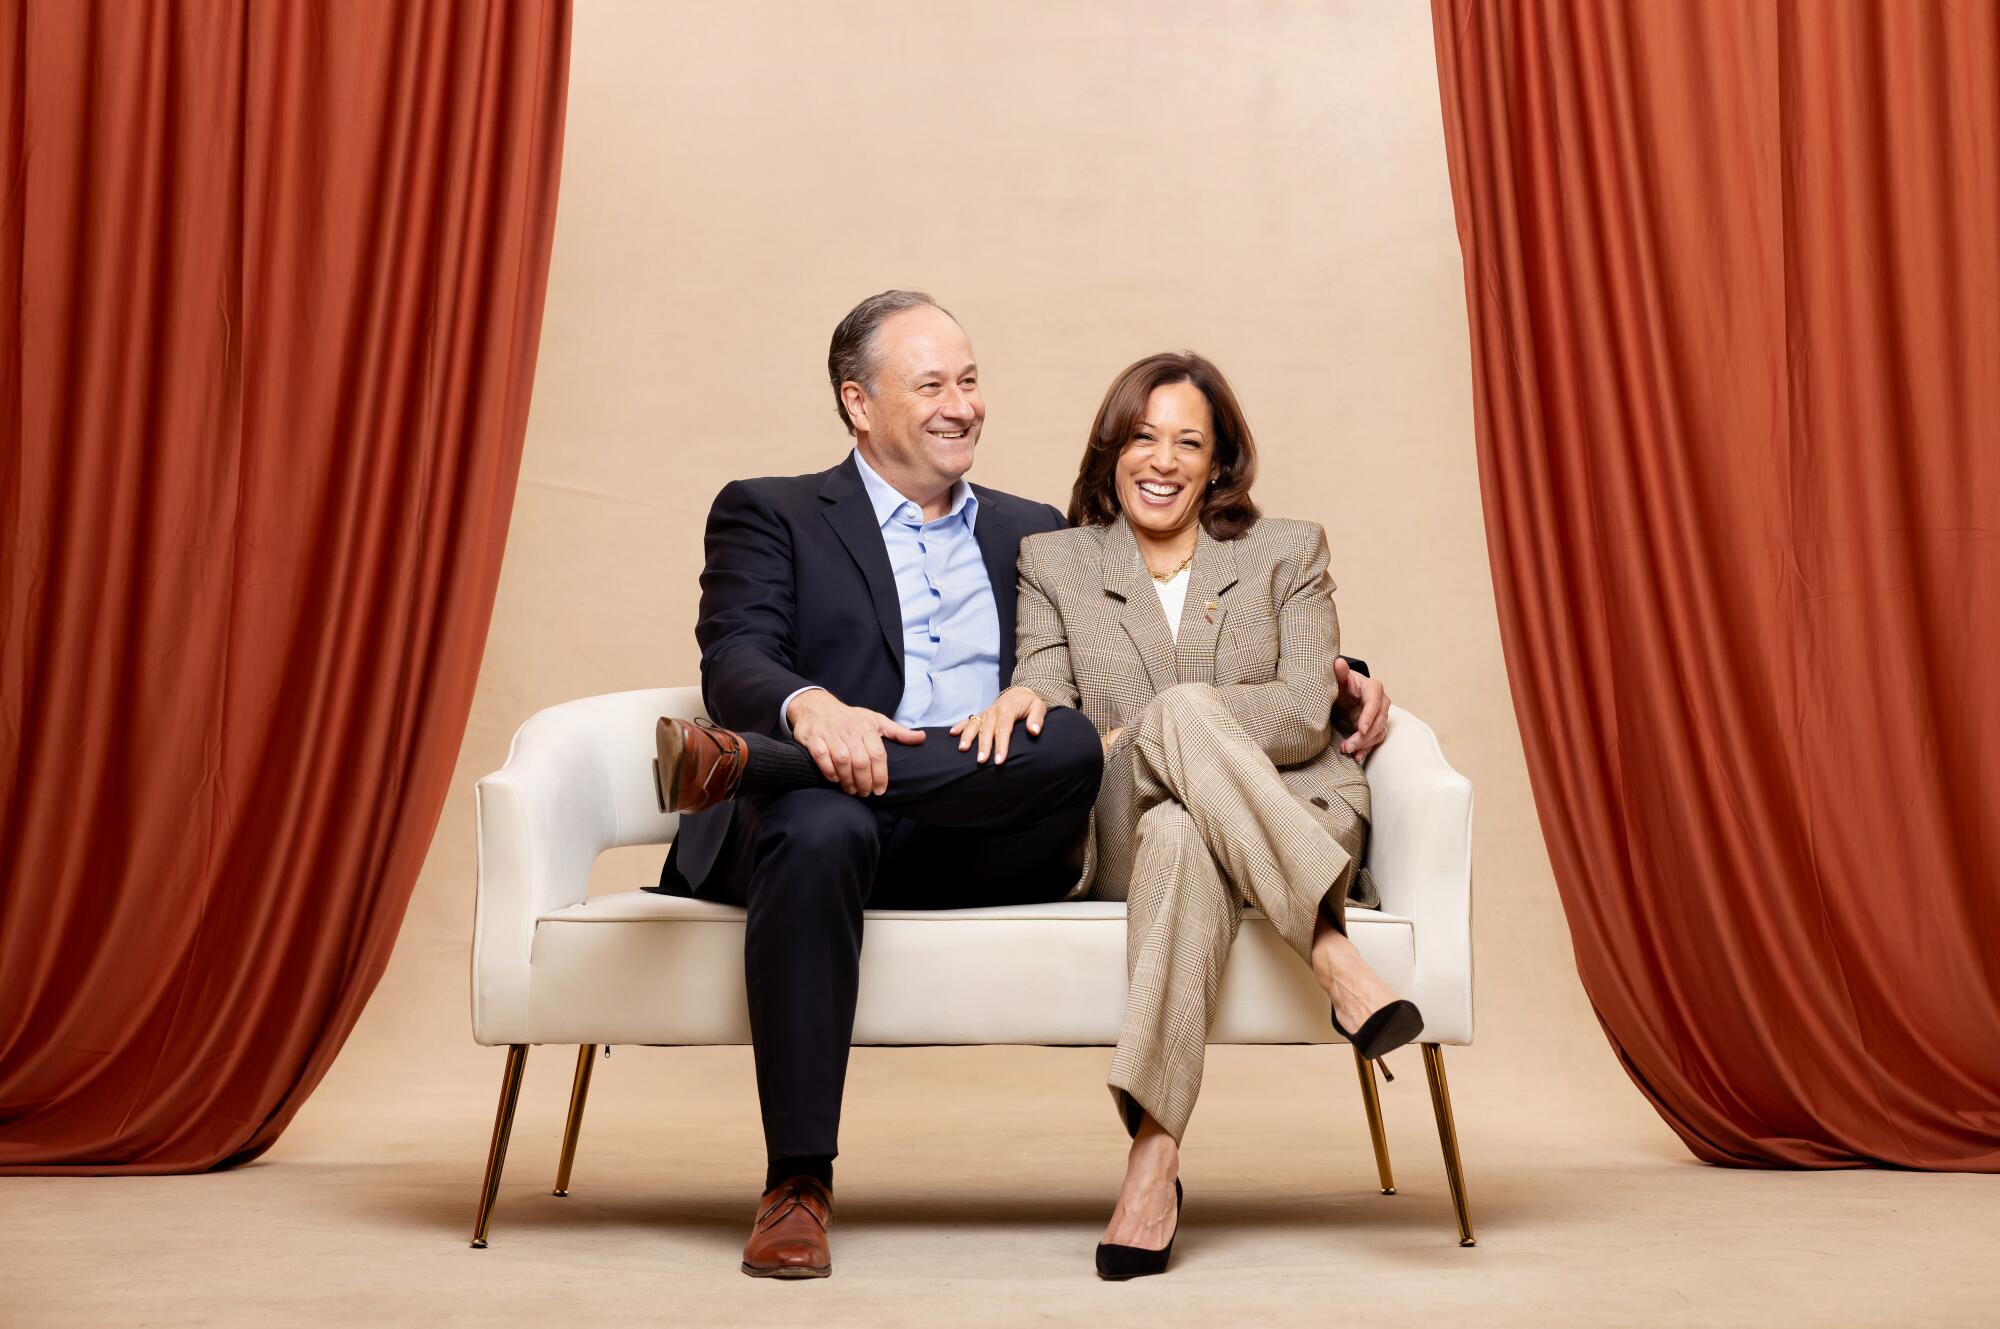  Vice President Kamala Harris and Second Gentleman Doug Emhoff sit on a couch with reddish-orange drapes on either side.